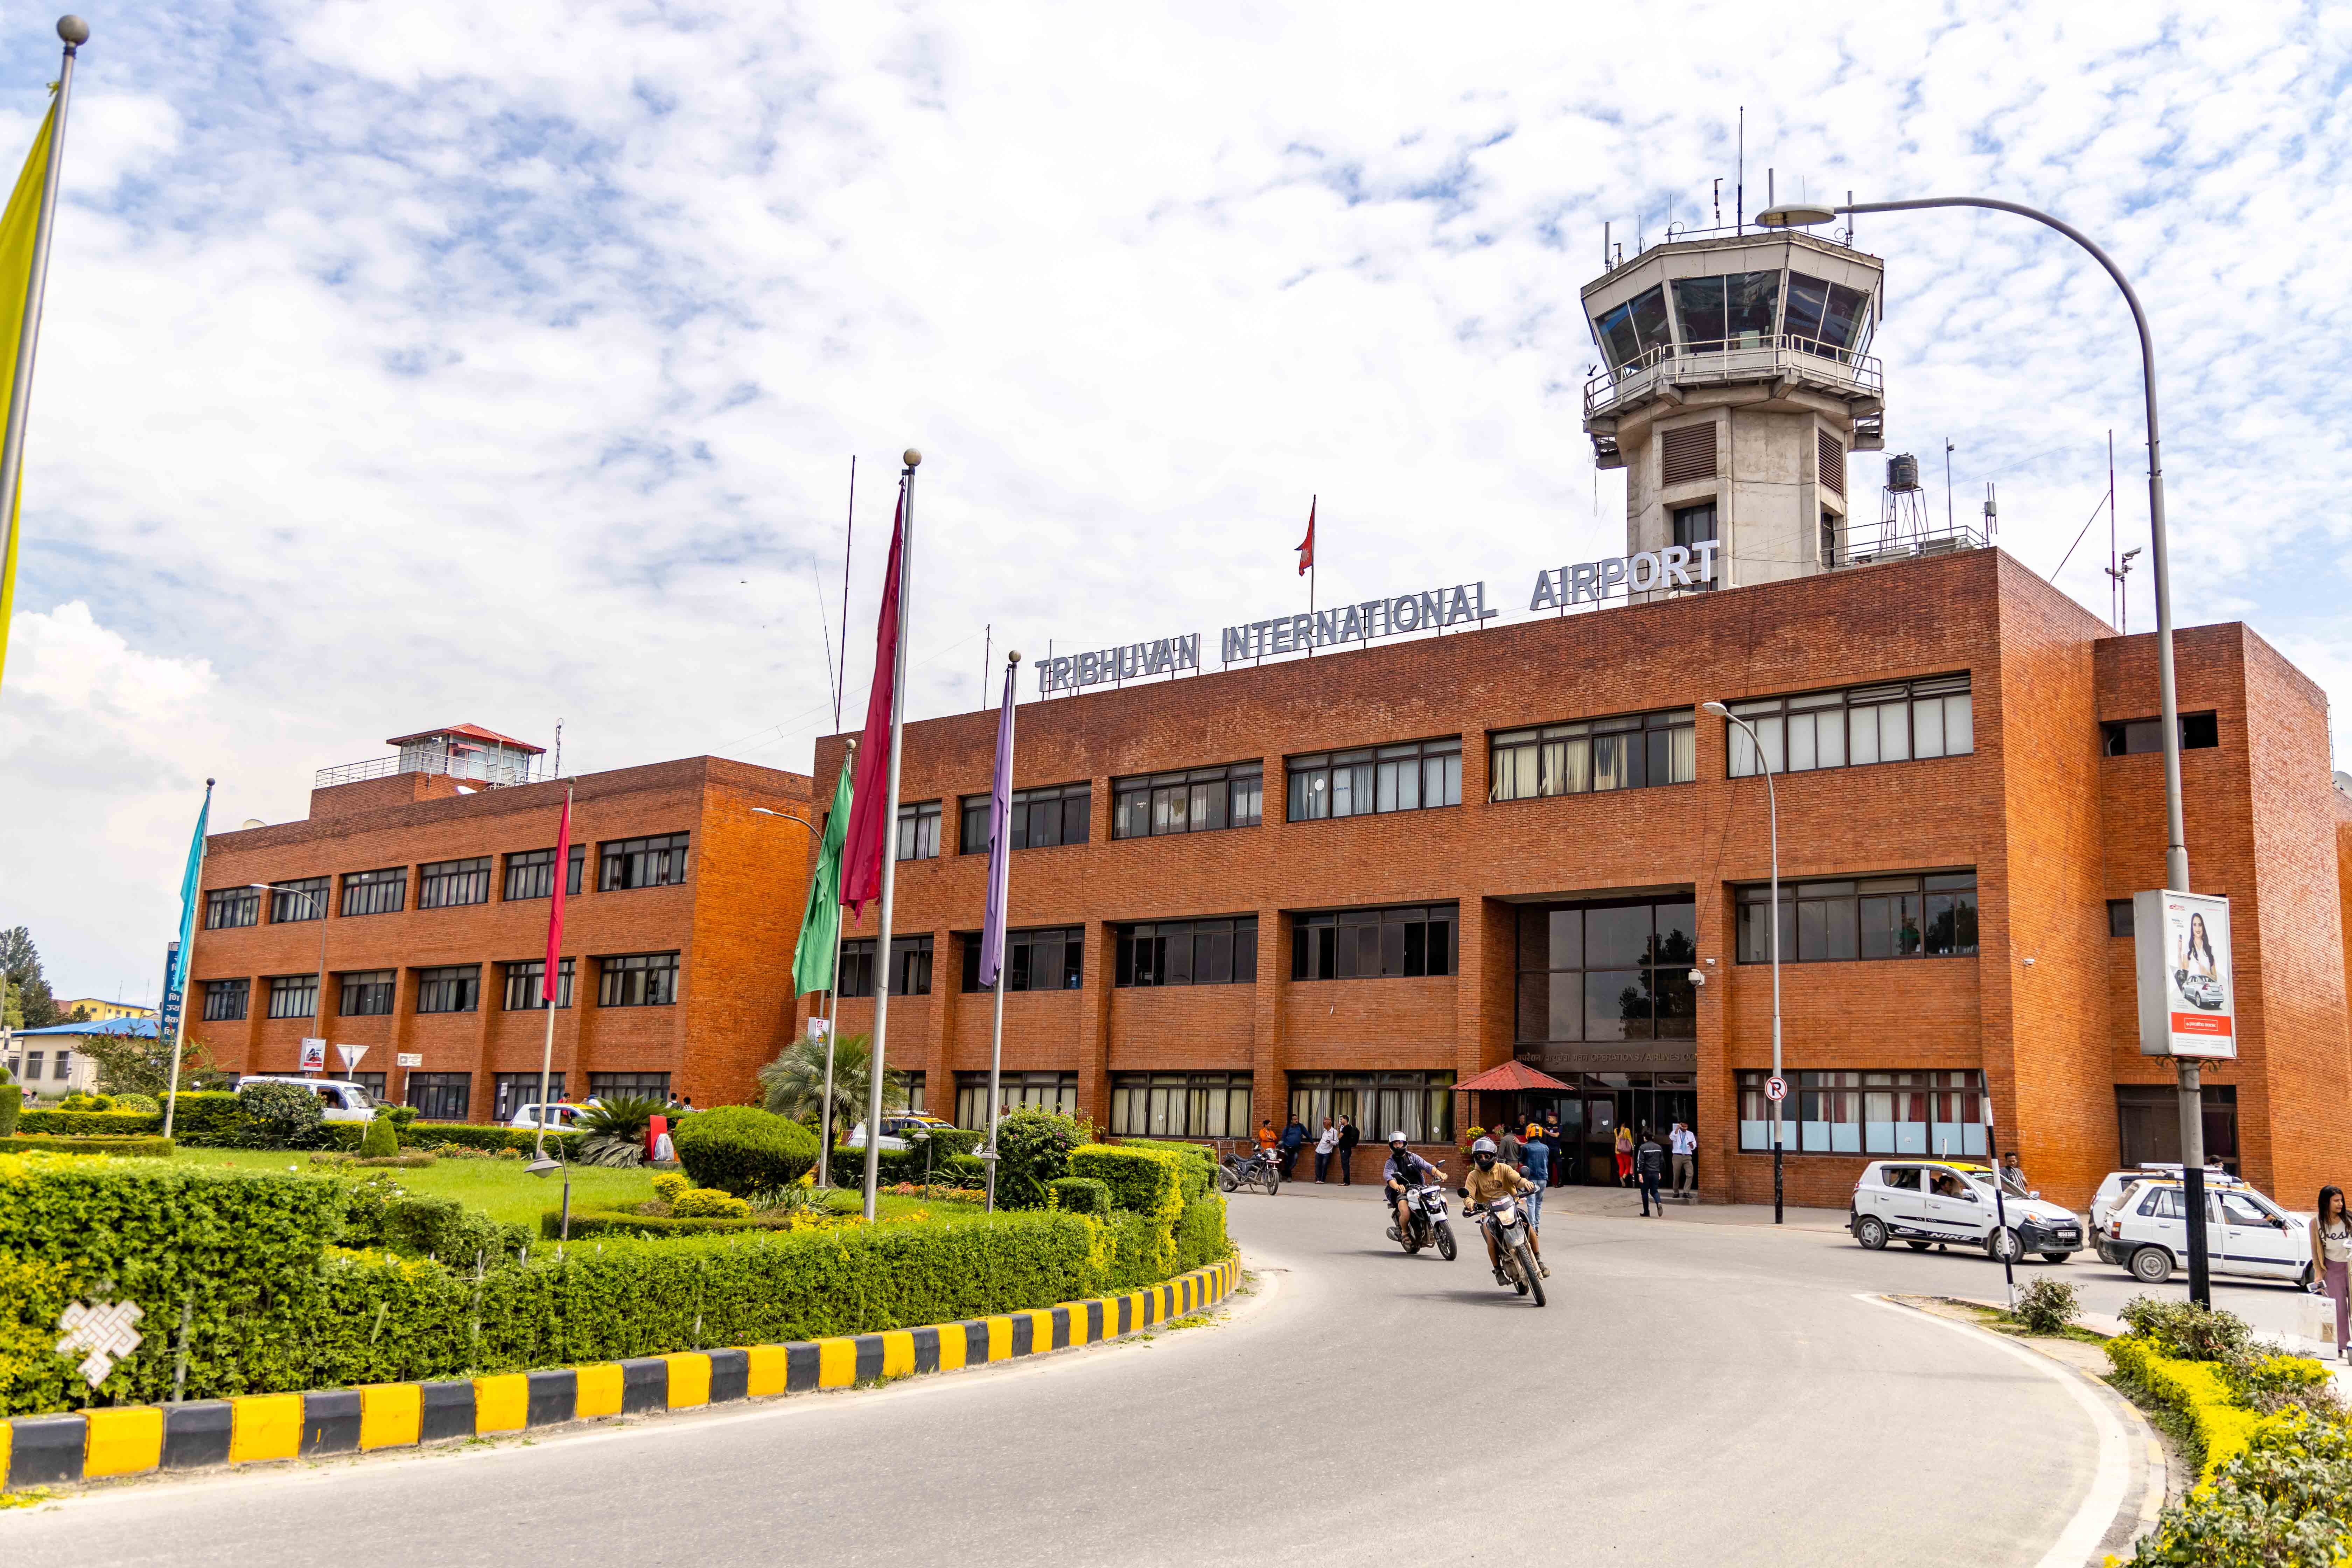 Officials said the airport incurred a loss of Rs4.50 billion due to reduced passenger numbers in the last fiscal year ended mid-July 2020. shutterstock